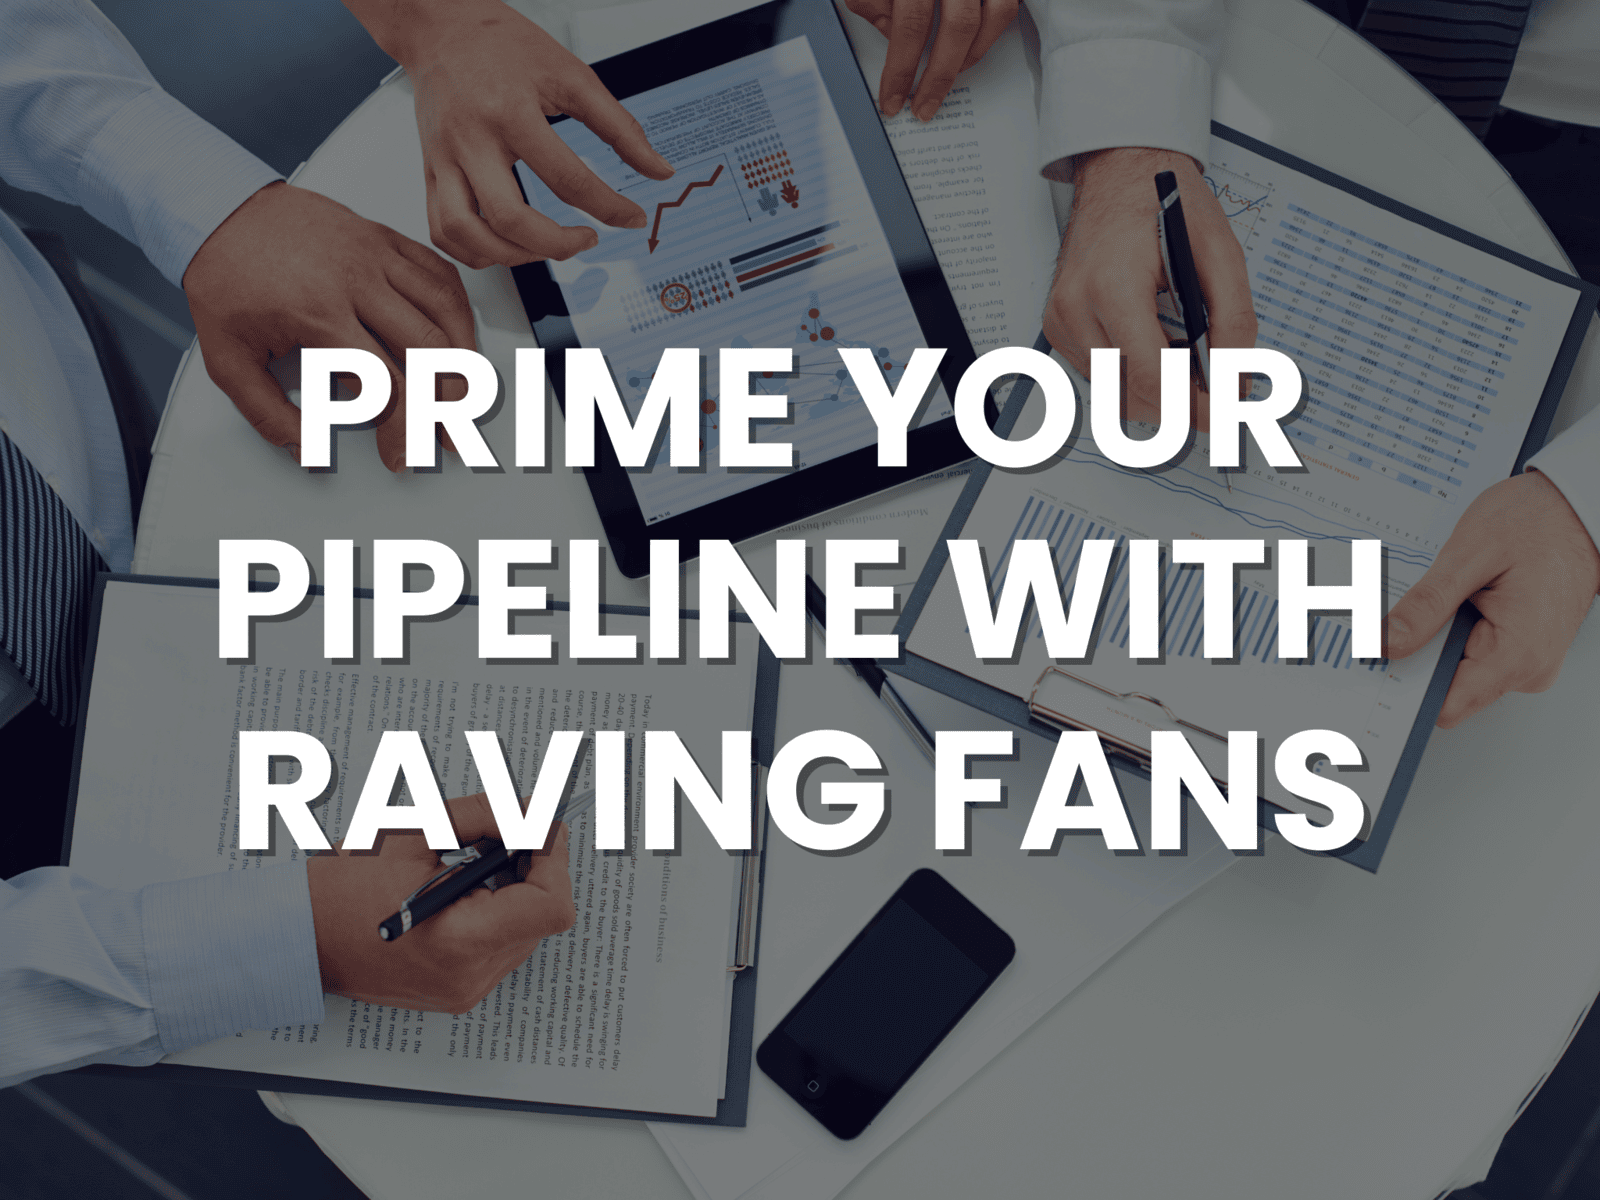 Prime your Pipeline with Raving Fans